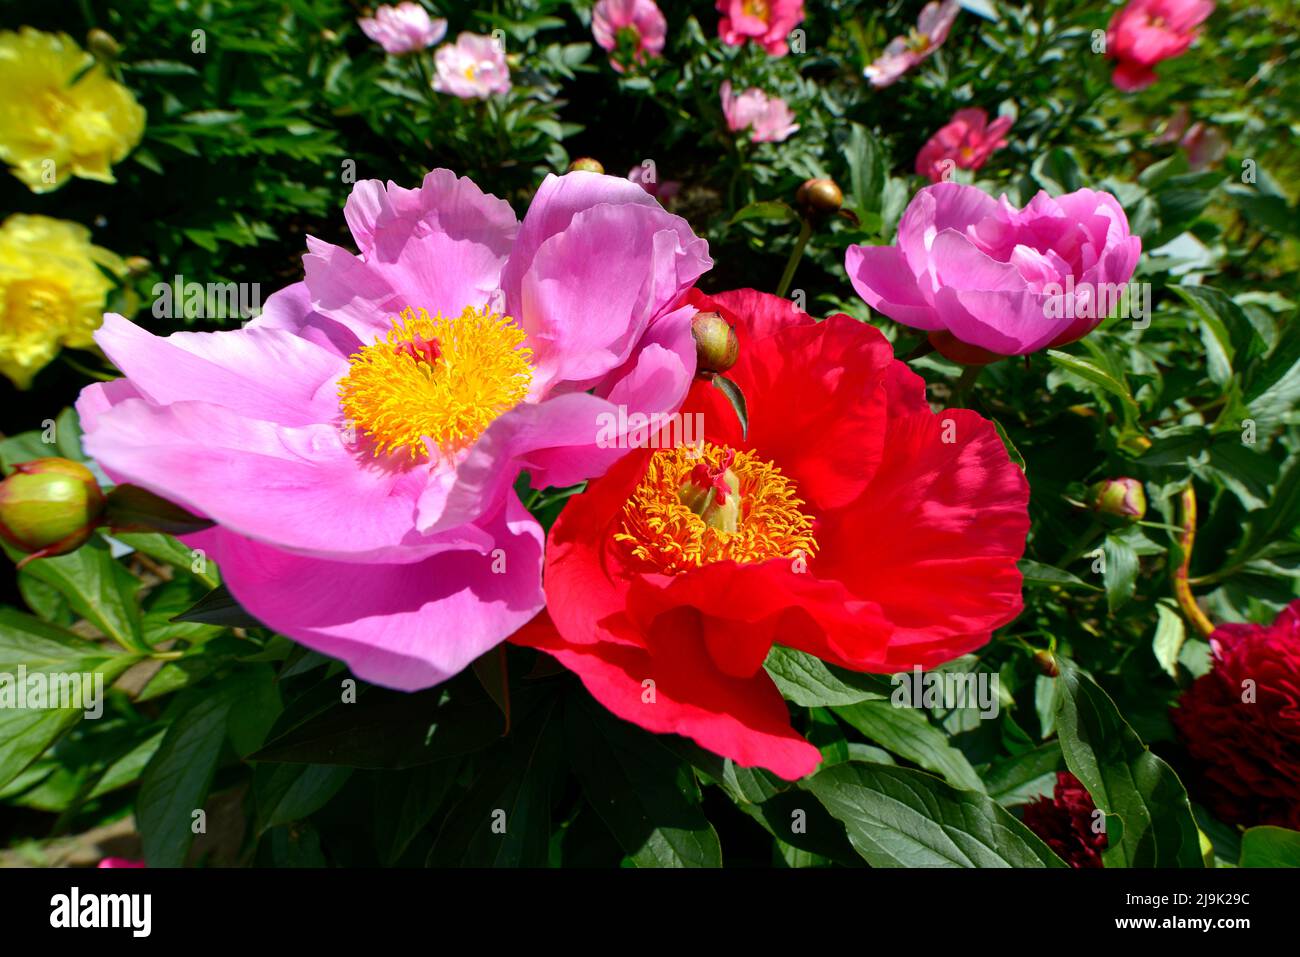 Closeup pink or red Chinese peony flowers (Paeonia lactiflora) with yellow stamens and a bee flying above the pink petals Stock Photo